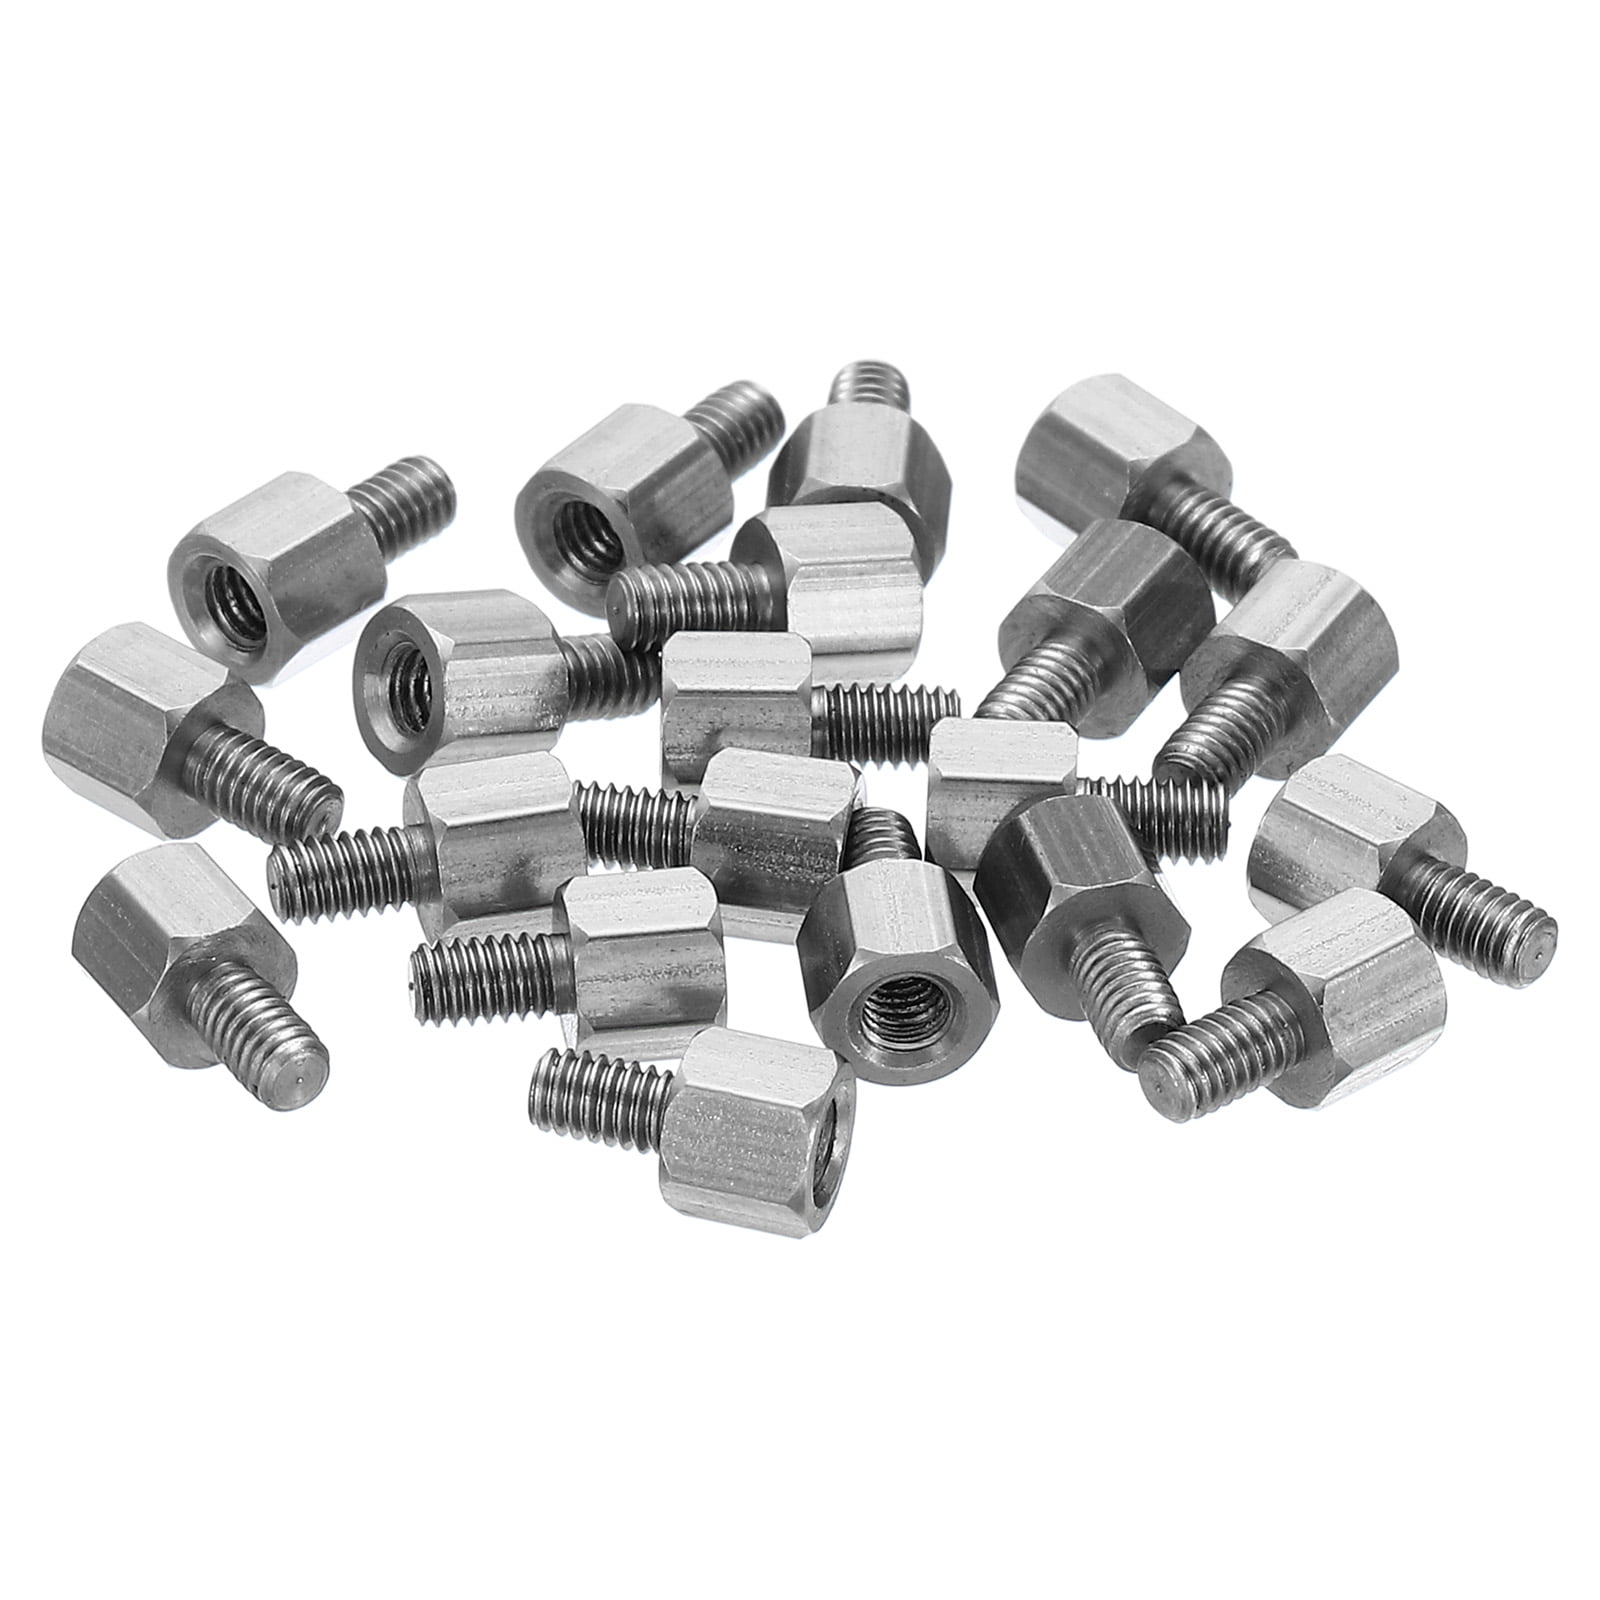 Uxcell M2.5x4mm+4mm Male-Female Hex Standoff Screws, Stainless Steel PCB  Standoffs for Motherboards, 20 Pack